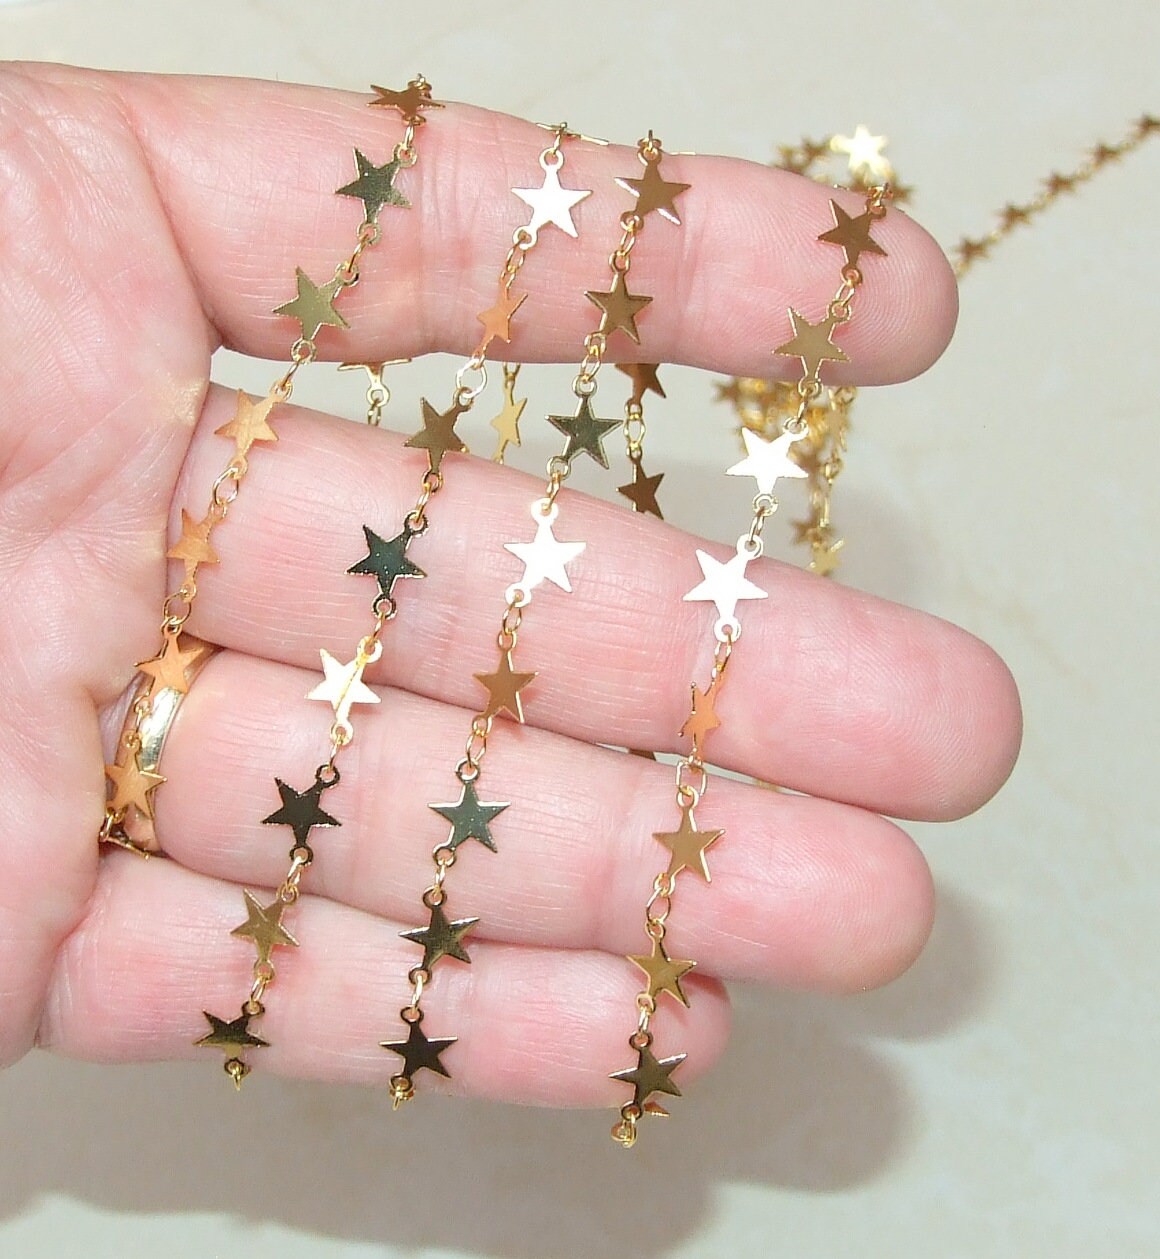 Gold Plated Star Shaped Chain, Necklace Chain, Bulk Chain, Jewelry Making, Body Chain, Belly Chain, By the Foot, 6.5mm x .3mm